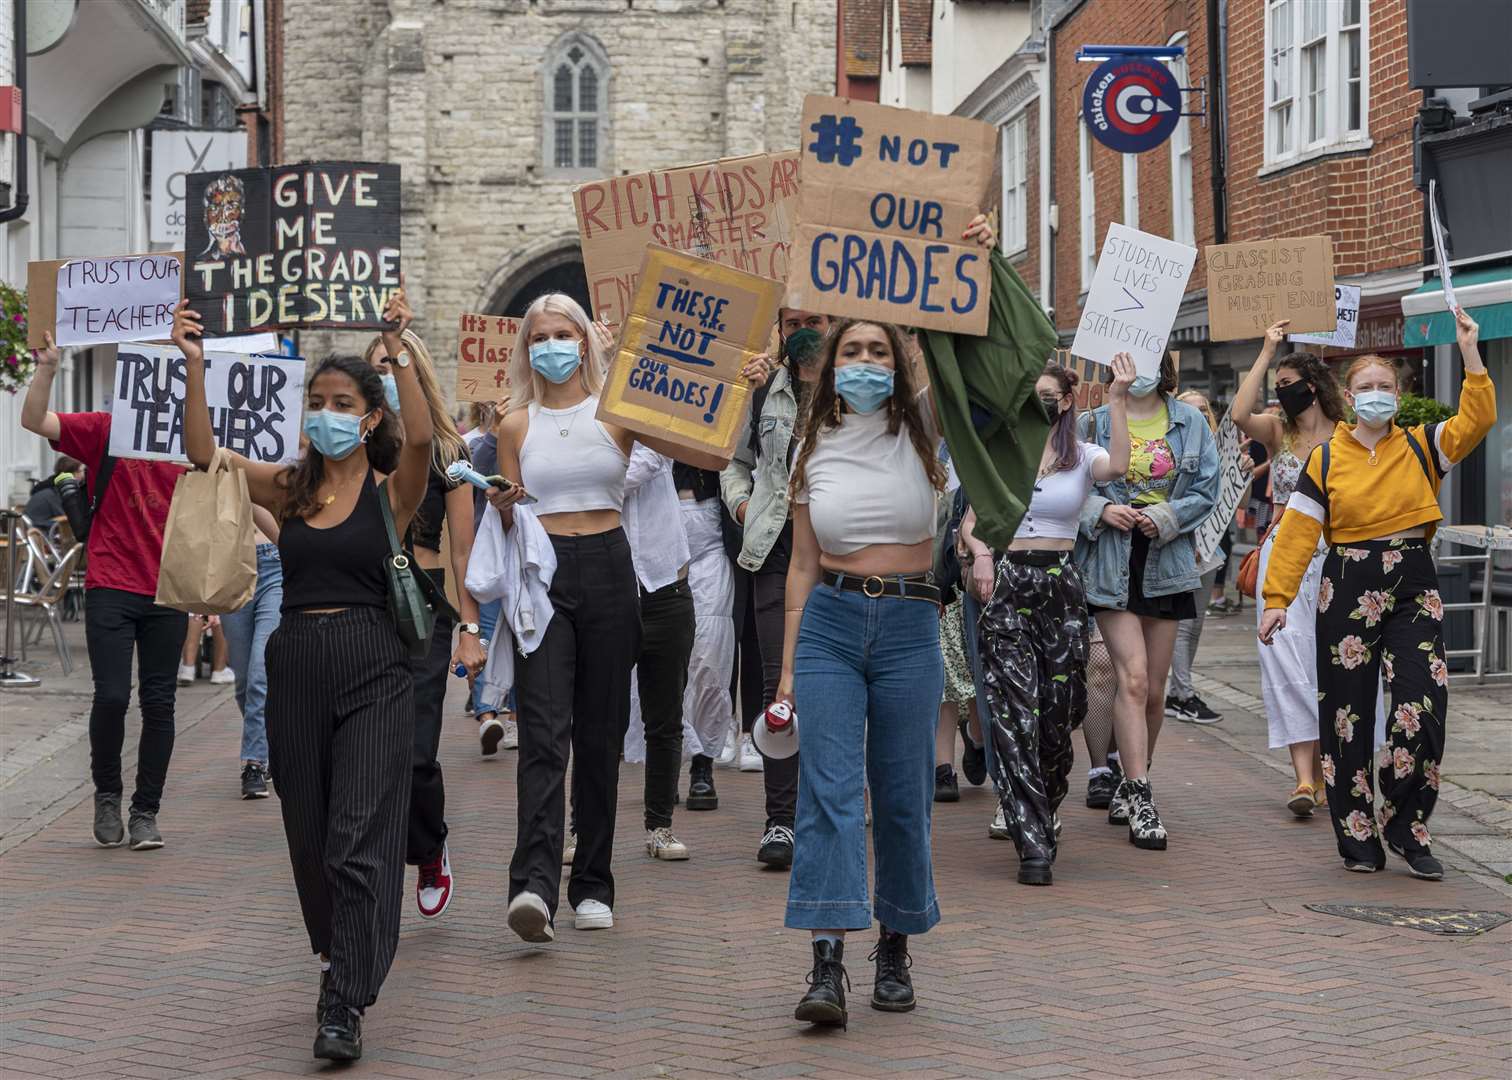 The pupils chanted: "These are not our grades!" Picture: Jo Court